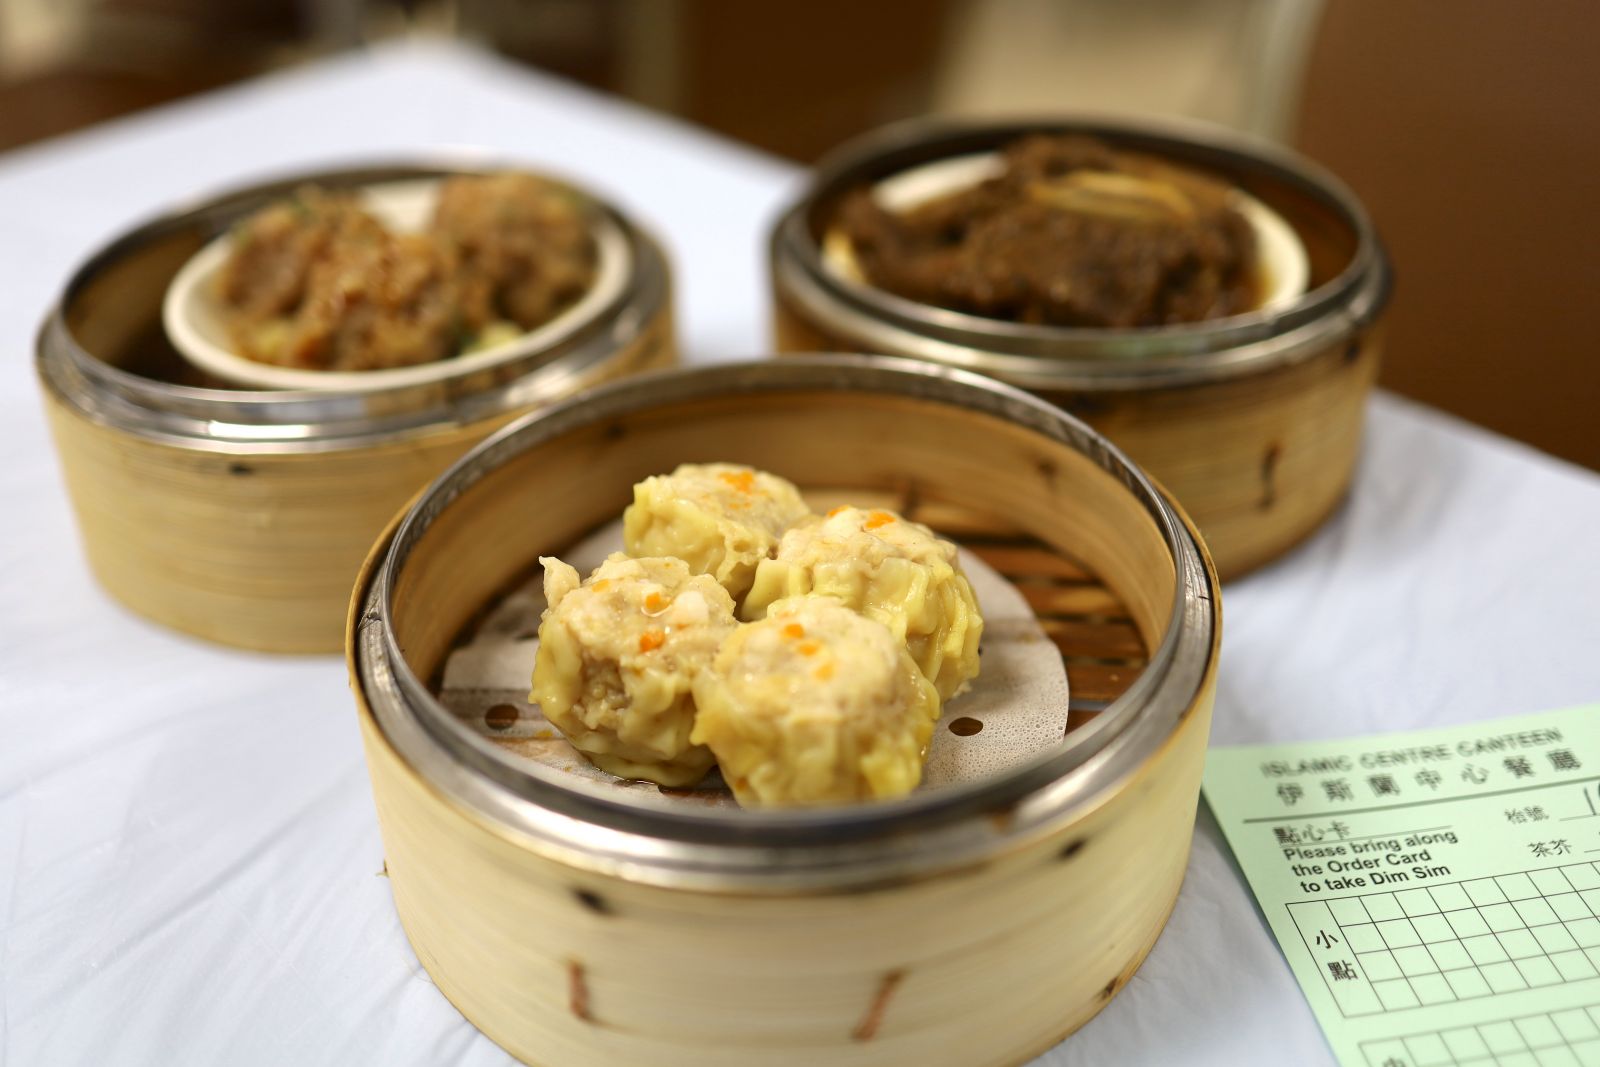 Keep an eye out for when the dimsum station is replenished from the kitchen.